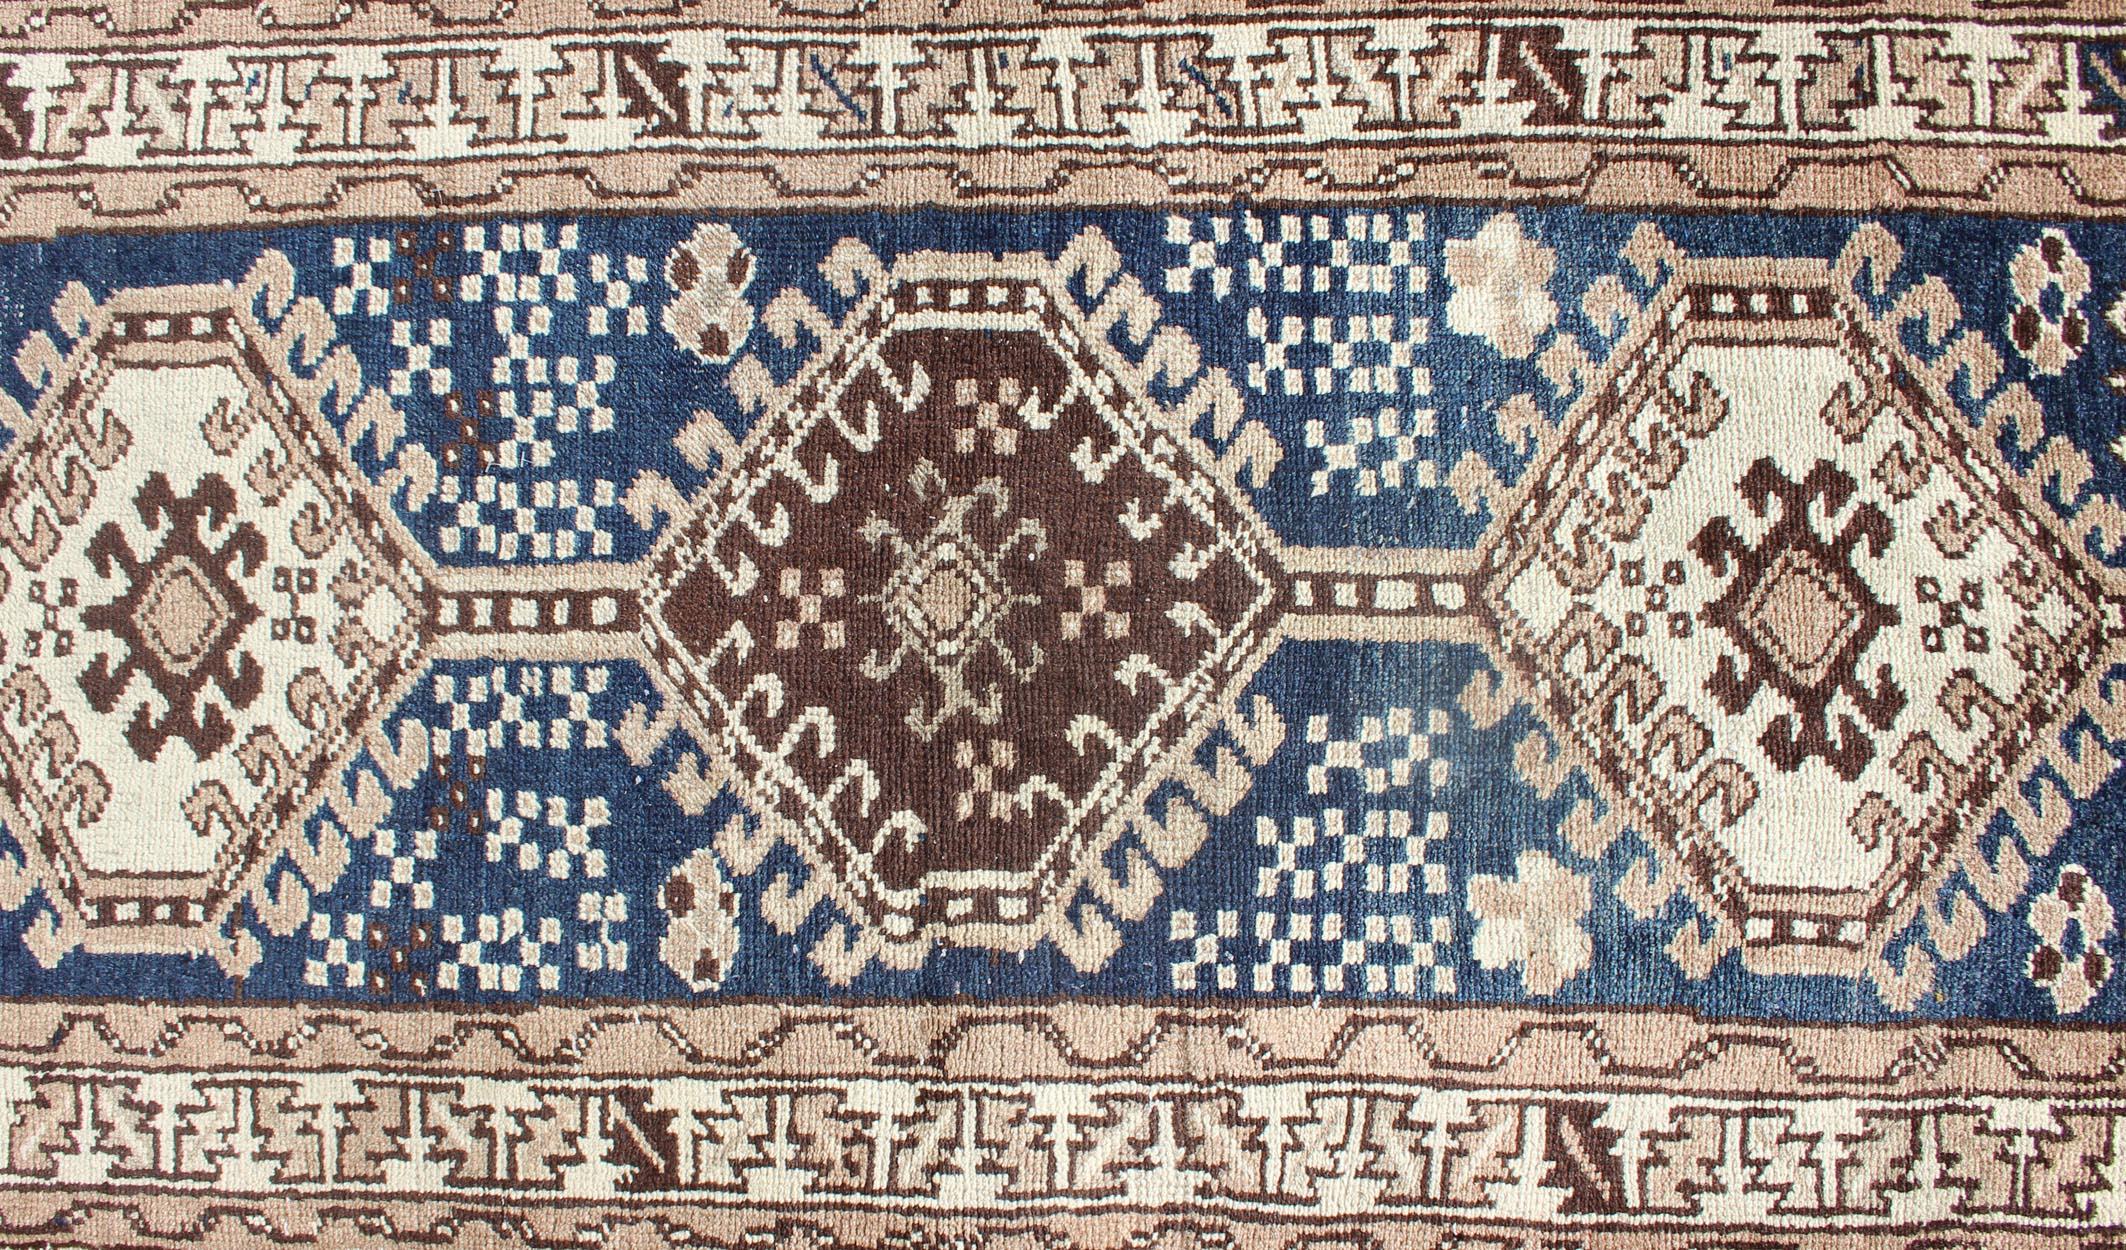 Early 20th Century Antique Blue Tribal Karajeh Runner With Navy Blue, Brown and Earth Tones For Sale